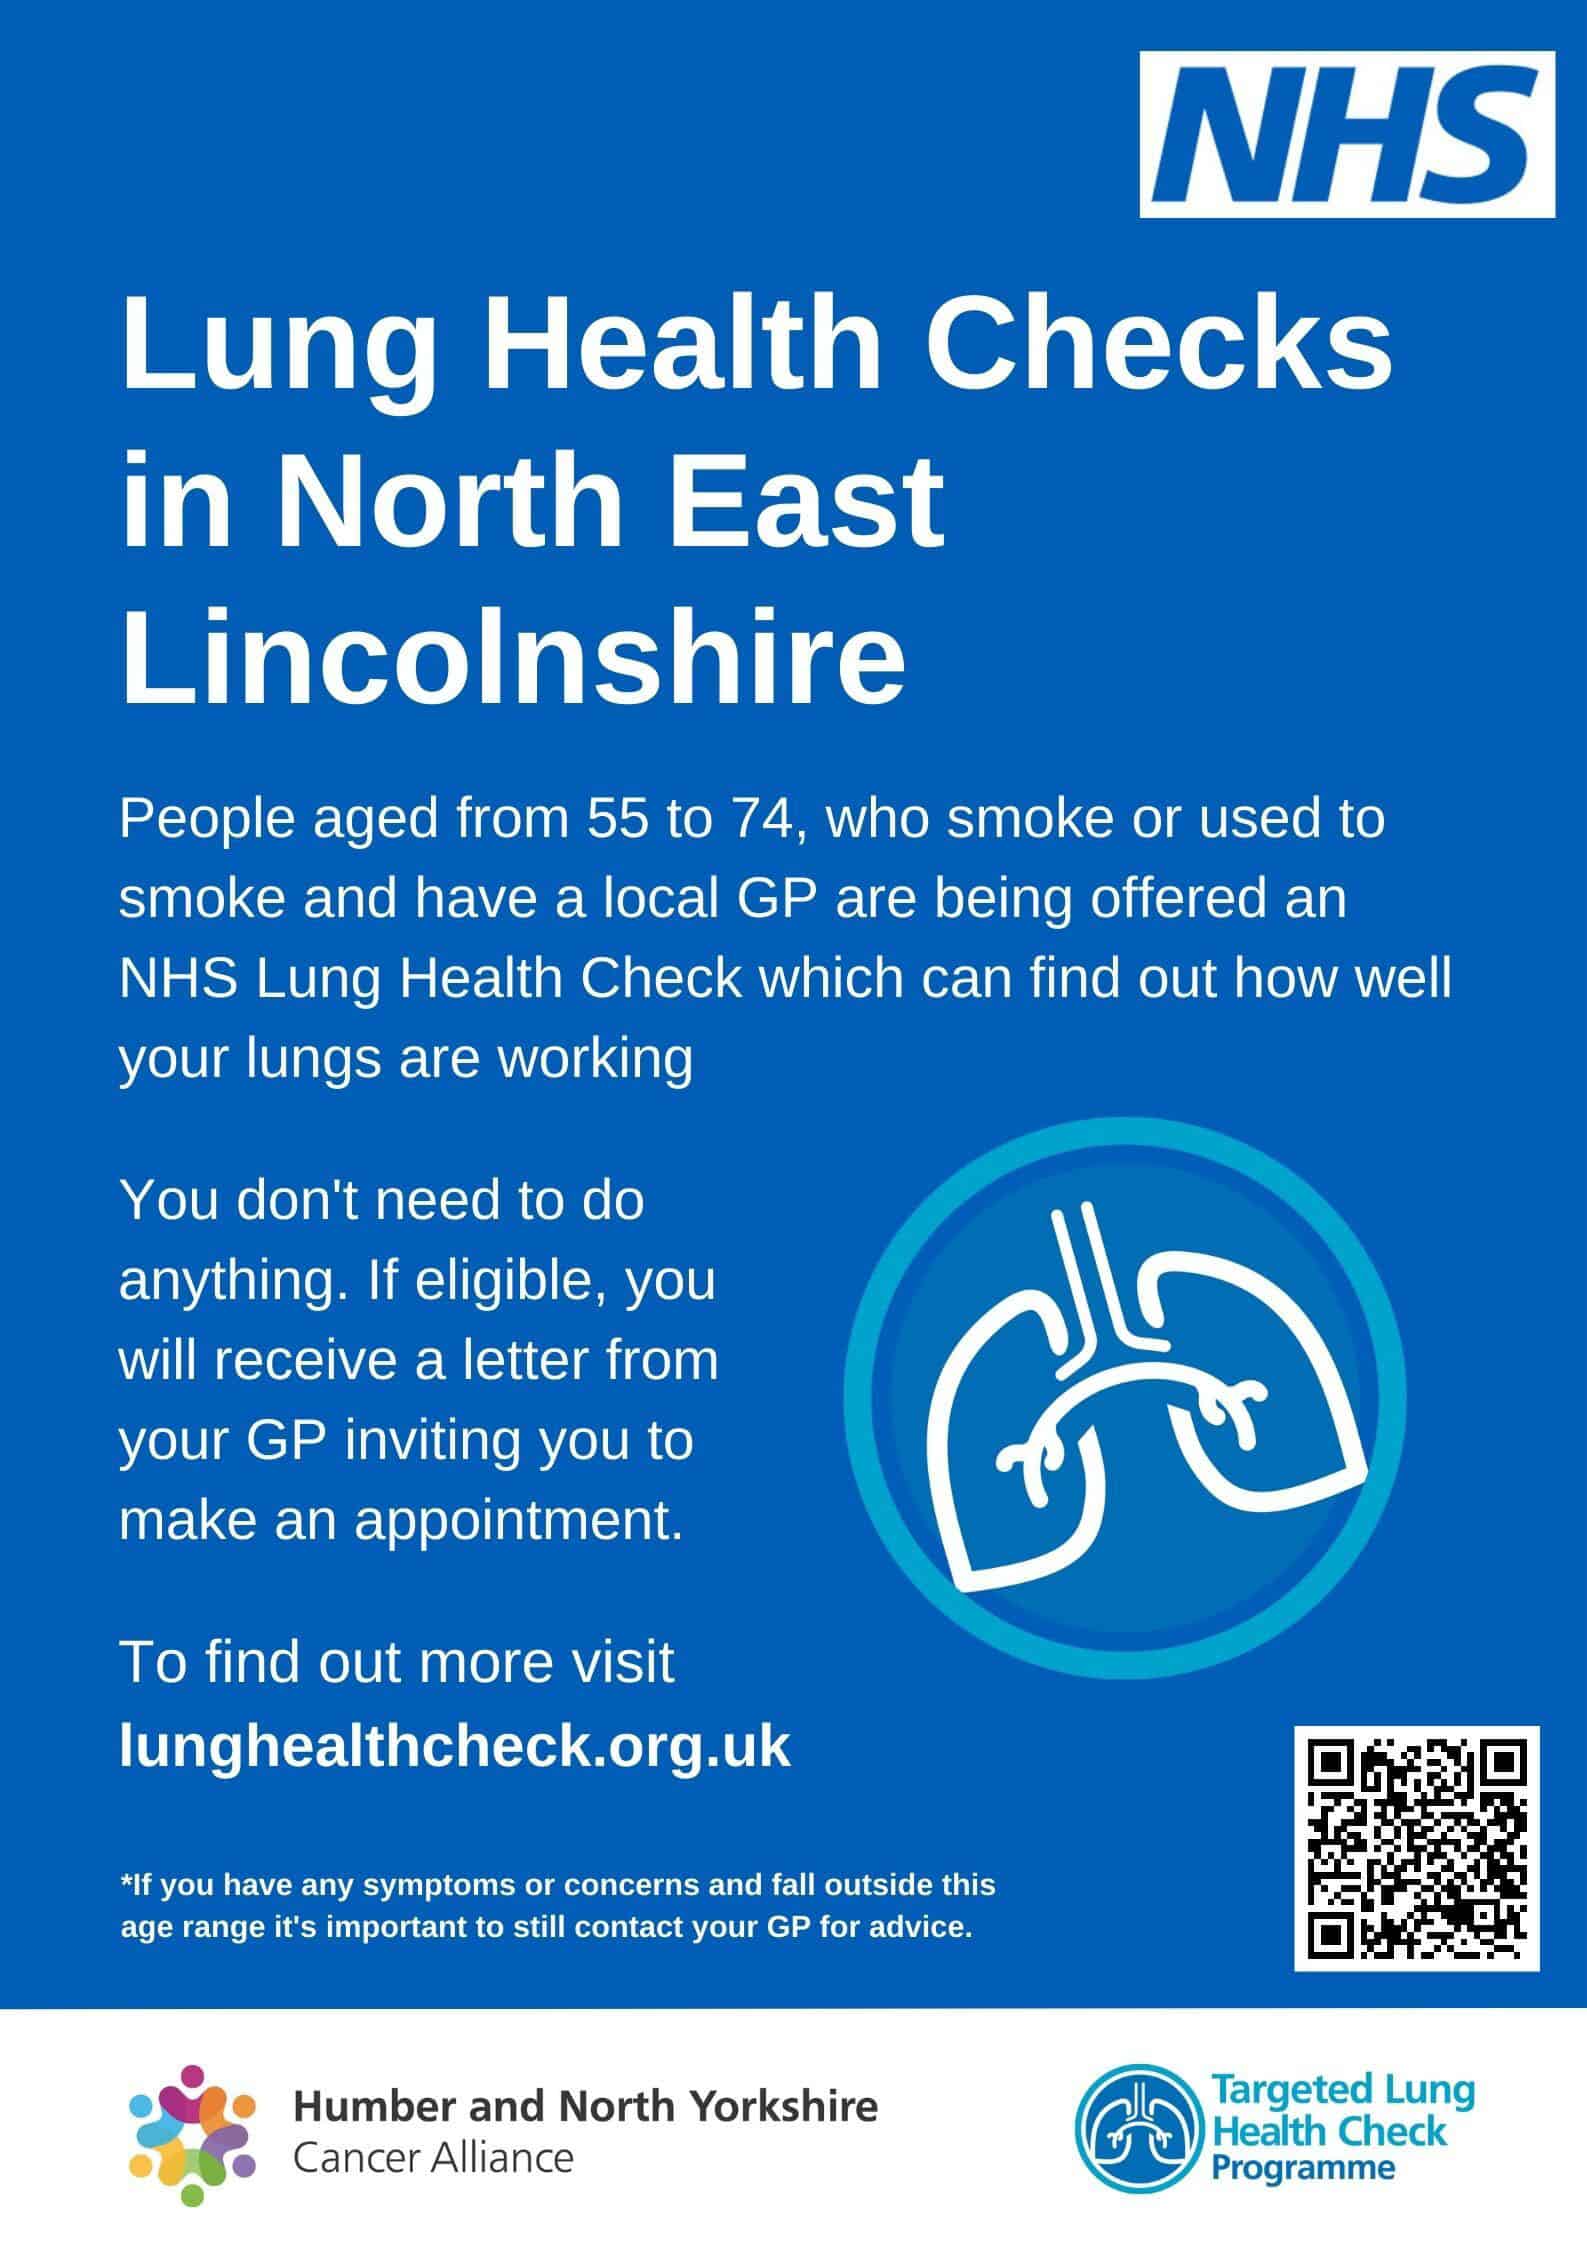 Lung Health Check poster with a picture of the lung health check logo, a pair of lungs in a circle, and written information about the checks